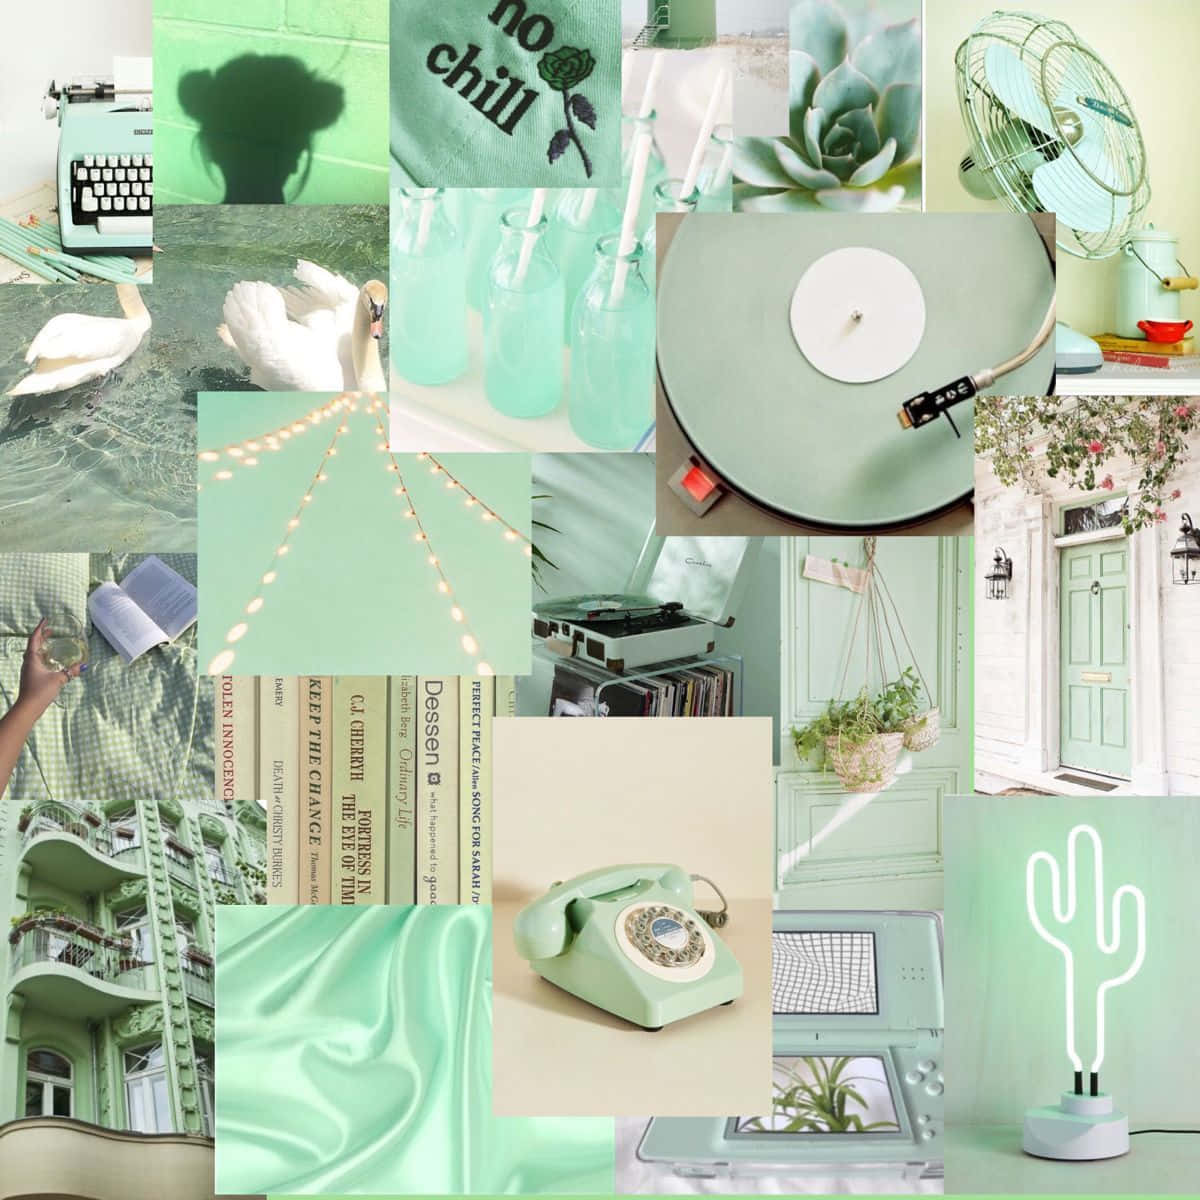 A Collage Of Pictures Of Green And White Items Wallpaper